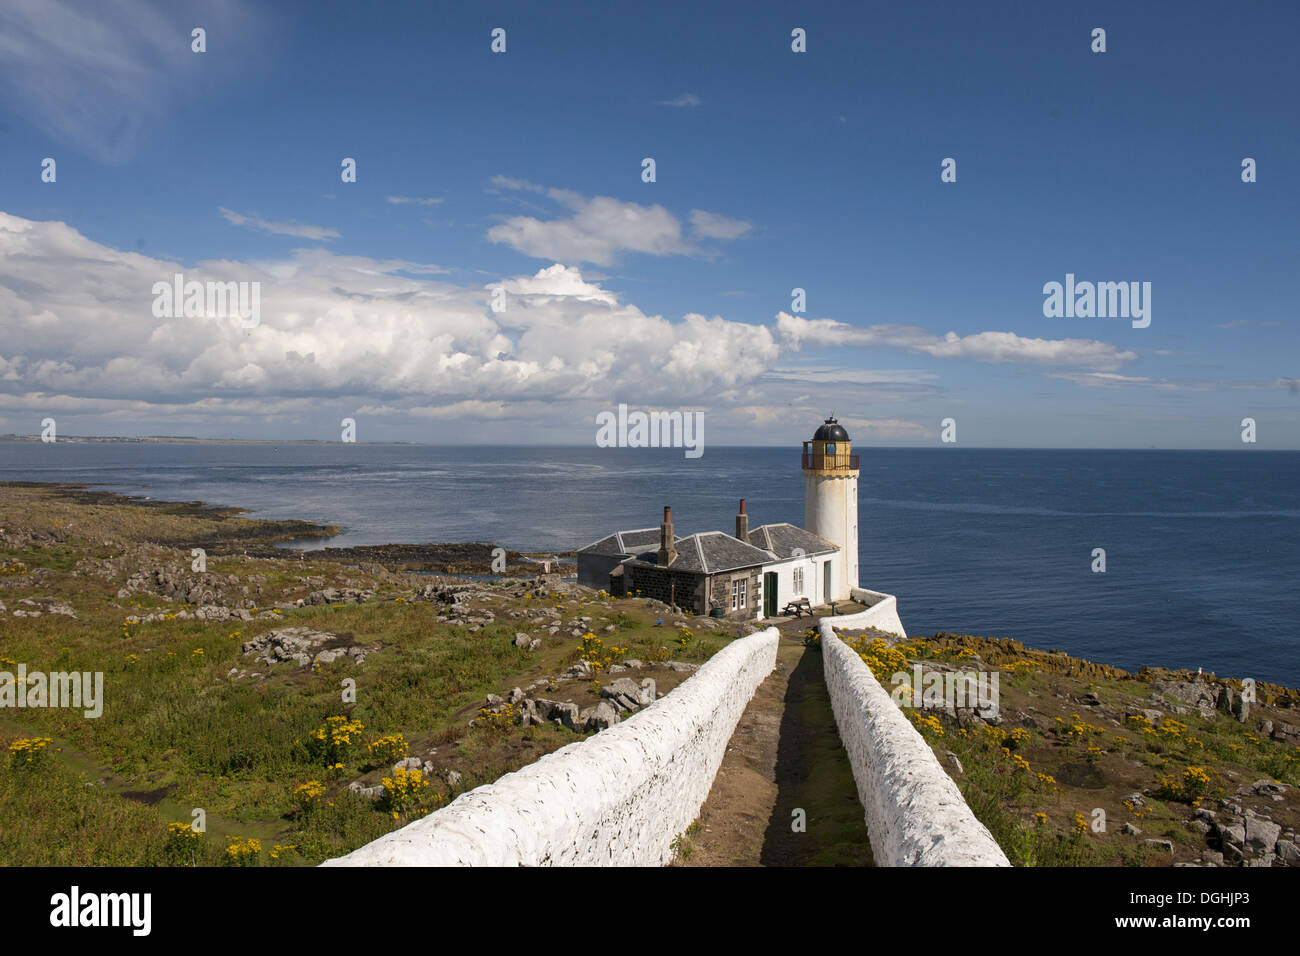 View of coastline and bird observatory housed in former lighthouse, Low Light, Isle of May, Firth of Forth, Scotland, July Stock Photo